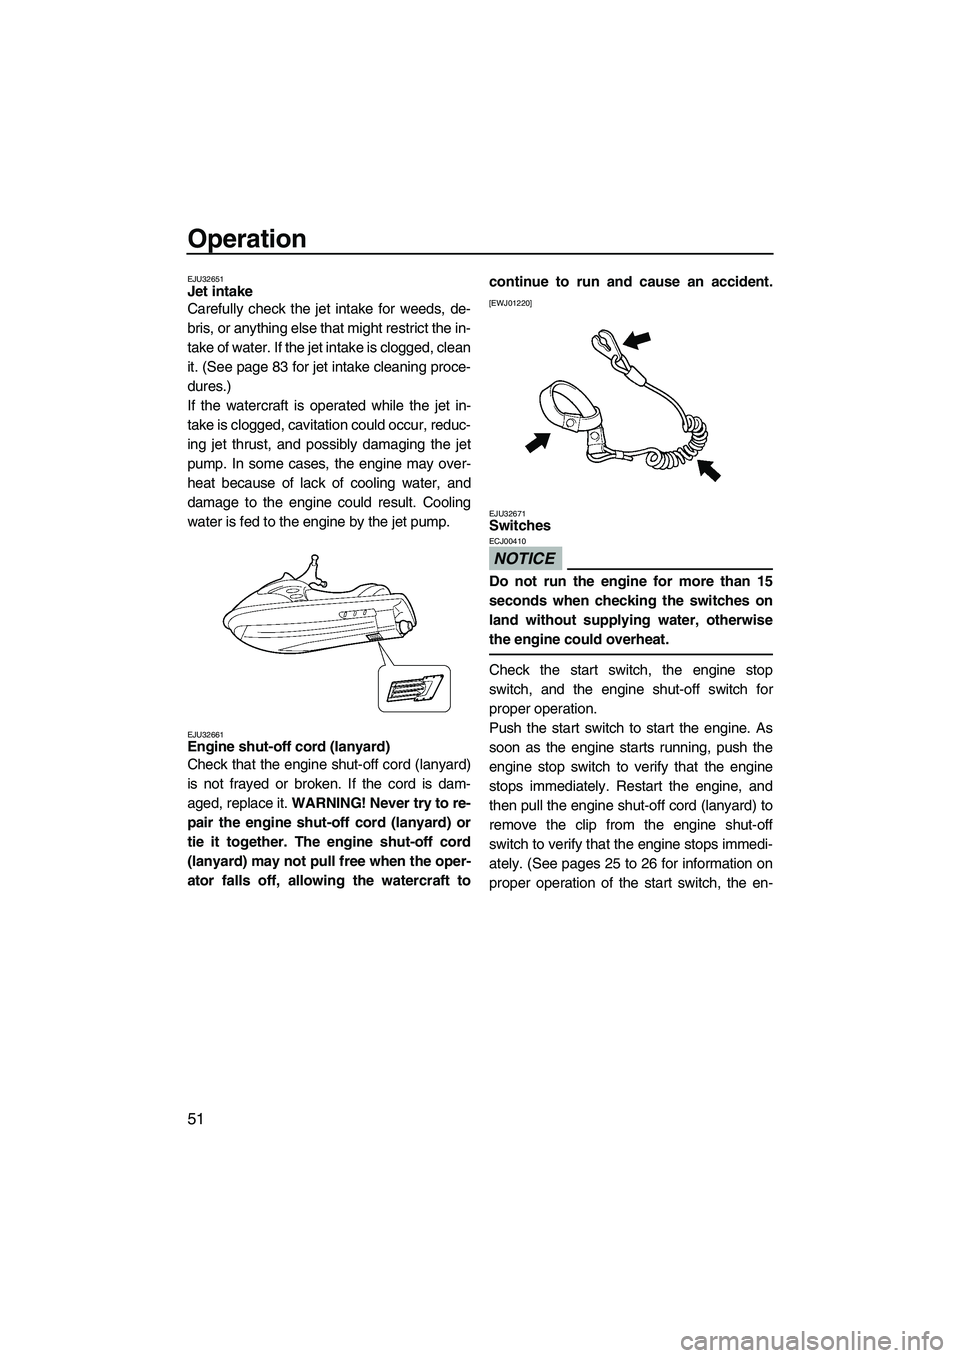 YAMAHA FZR 2009  Owners Manual Operation
51
EJU32651Jet intake 
Carefully check the jet intake for weeds, de-
bris, or anything else that might restrict the in-
take of water. If the jet intake is clogged, clean
it. (See page 83 fo